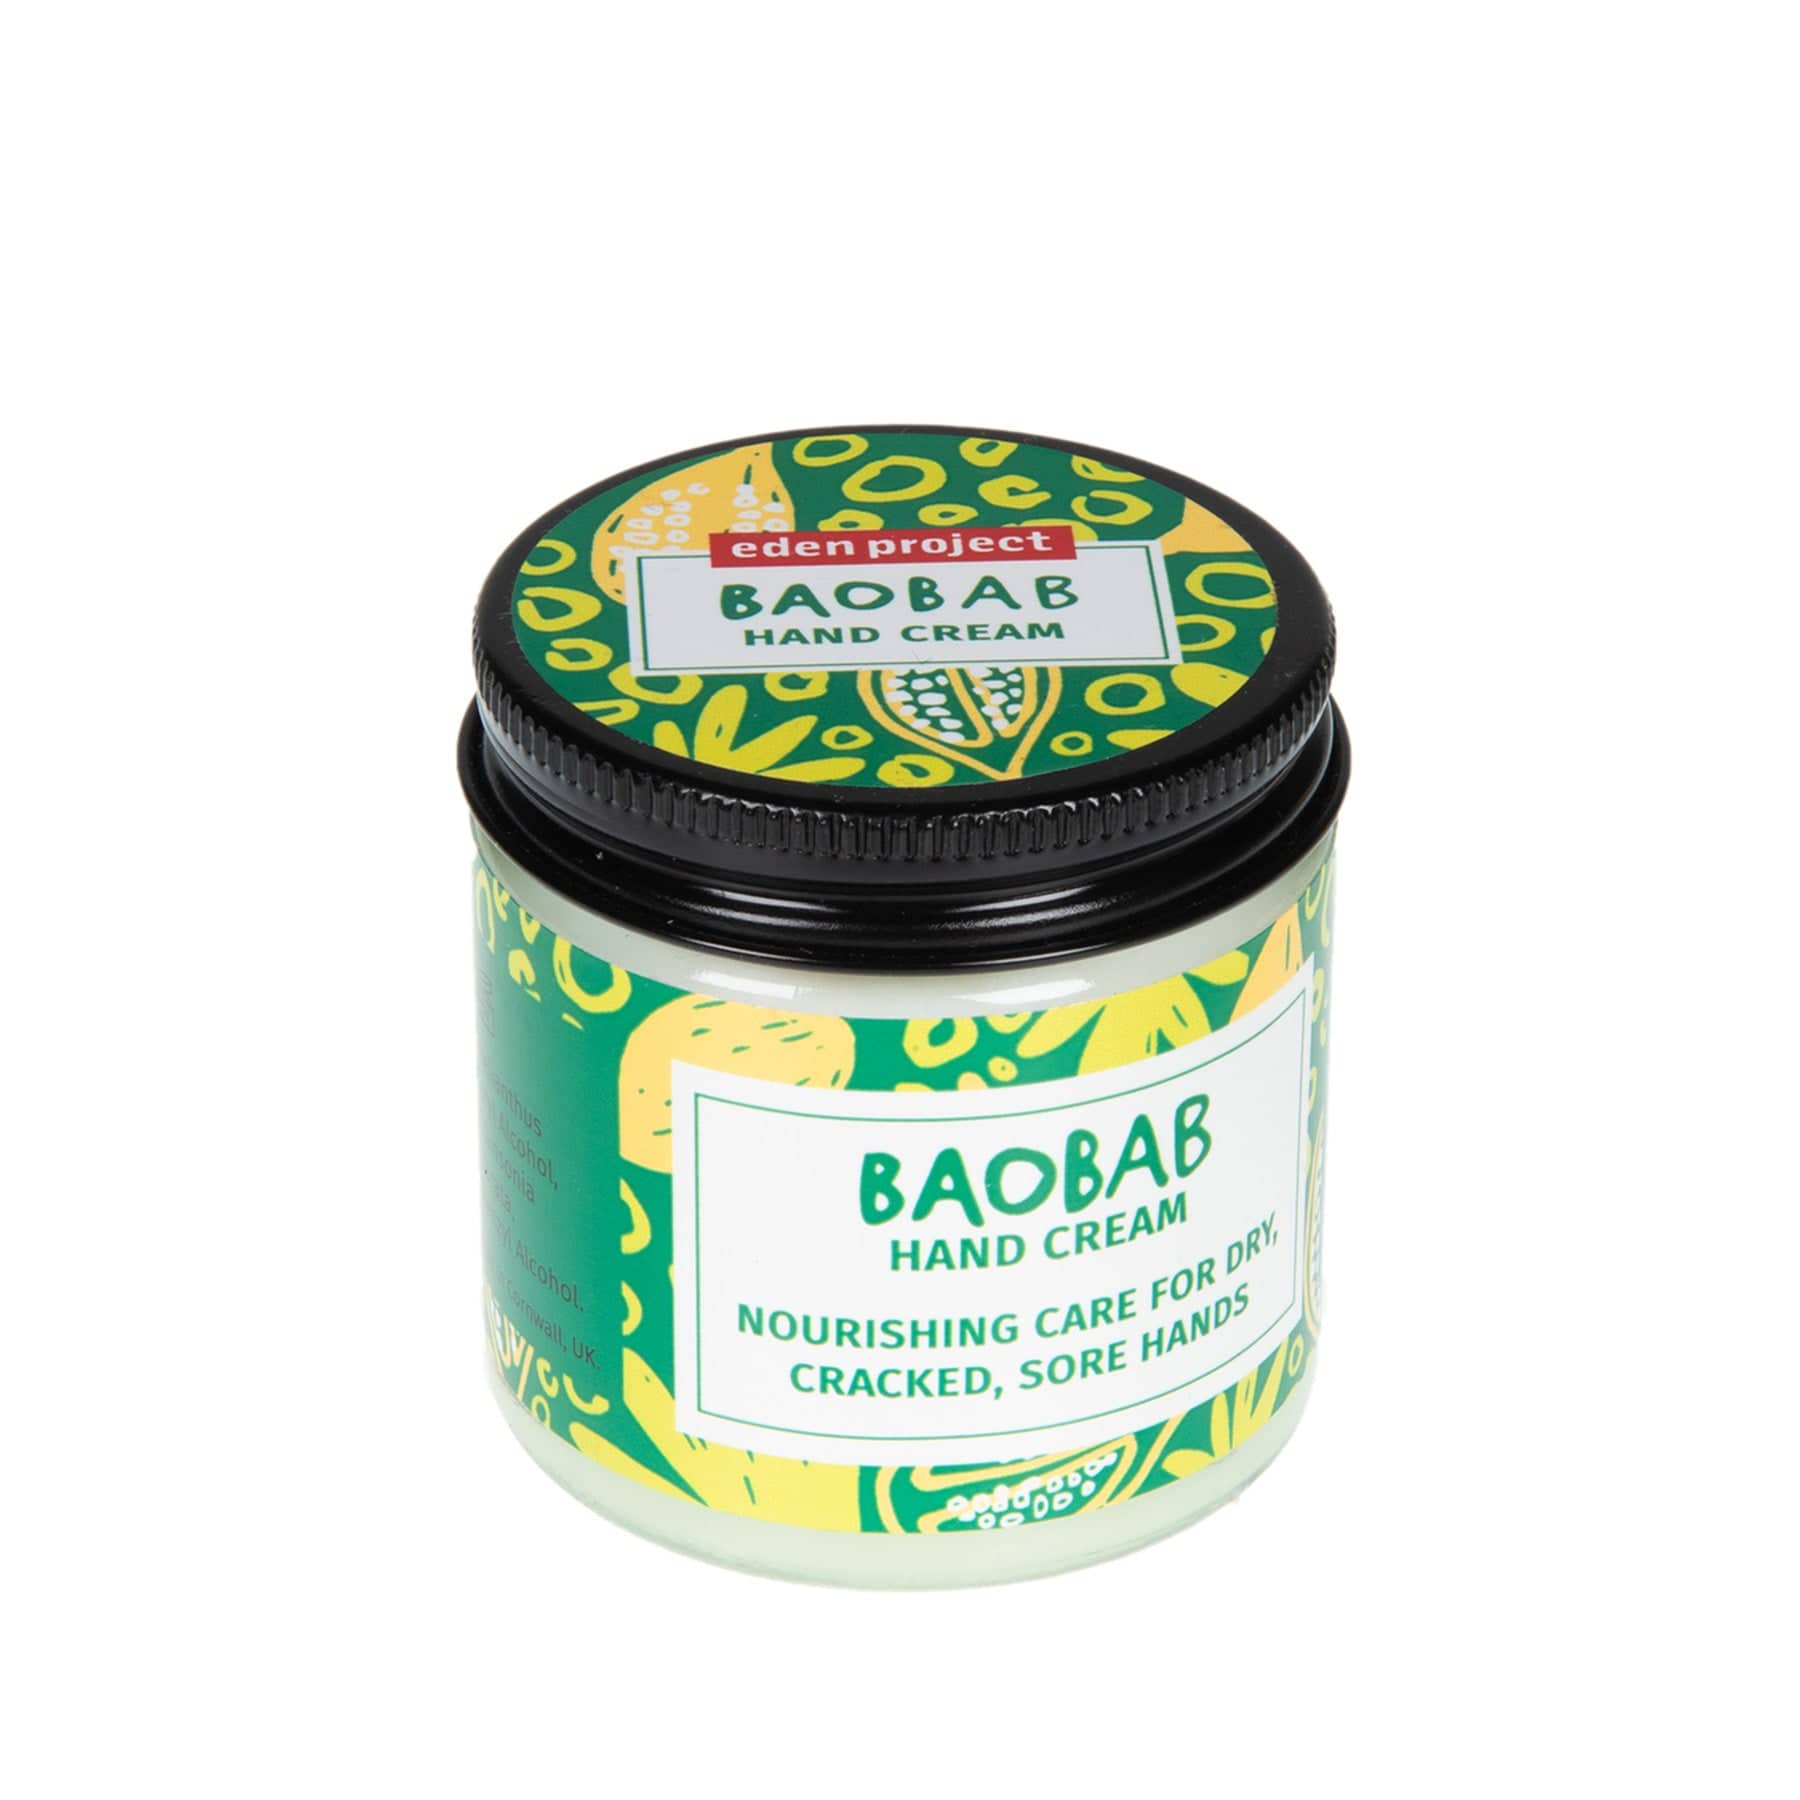 Baobab hand cream jar with green and yellow packaging labeled "Nourishing care for dry, cracked, sore hands" from the Eden Project.